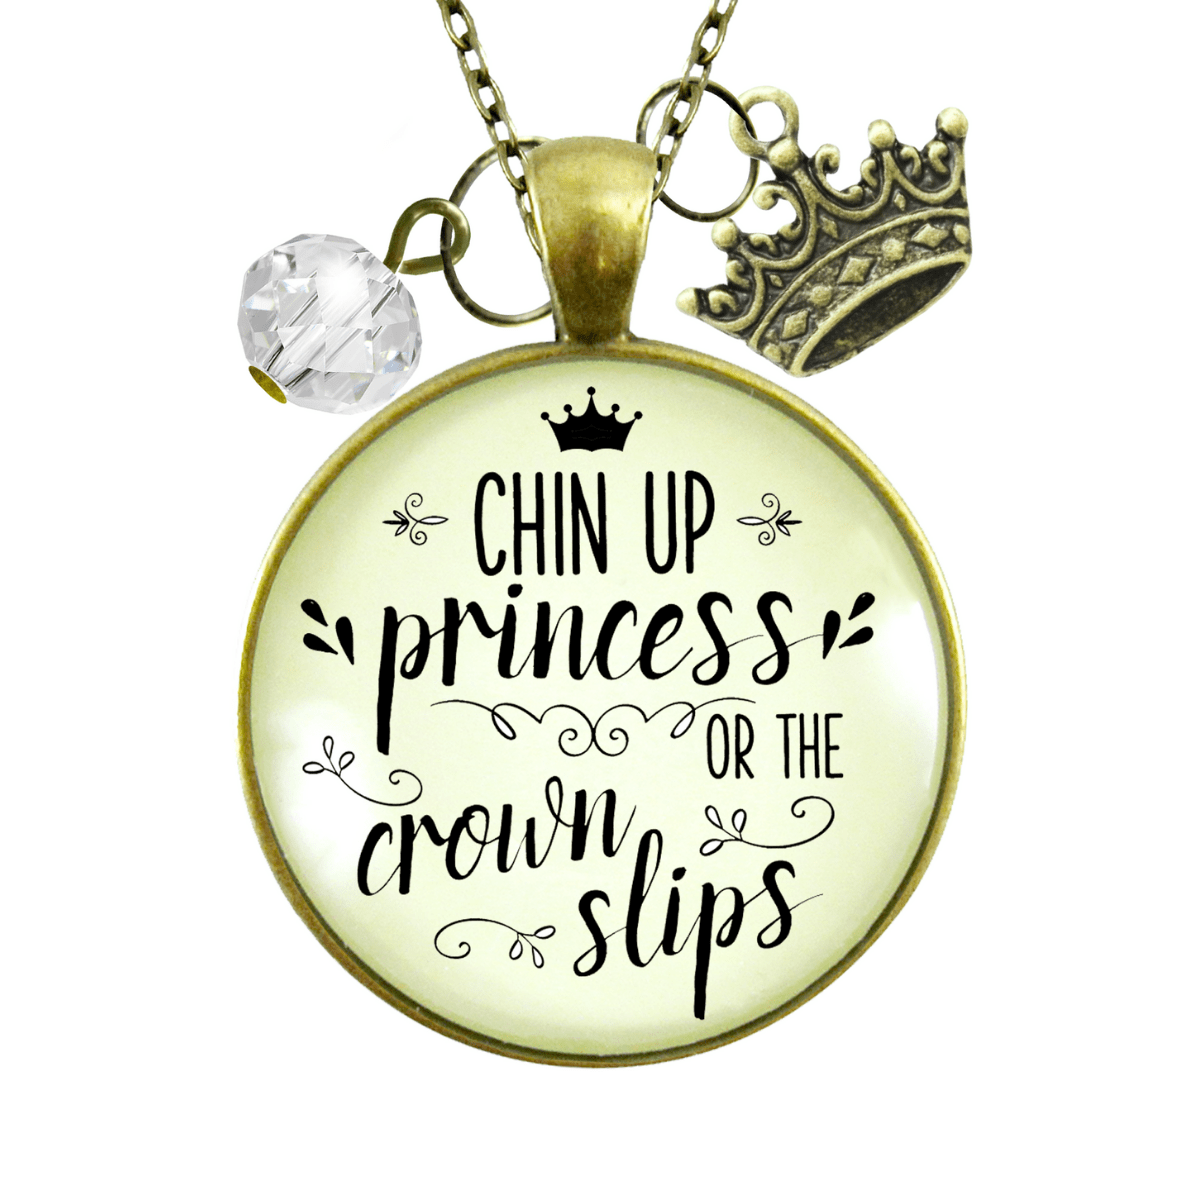 Chin Up Princess Necklace Quote Jewelry Crown Slips Inspired Life Warrior Gift - Gutsy Goodness Handmade Jewelry;Chin Up Princess Necklace Quote Jewelry Crown Slips Inspired Life Warrior Gift - Gutsy Goodness Handmade Jewelry Gifts